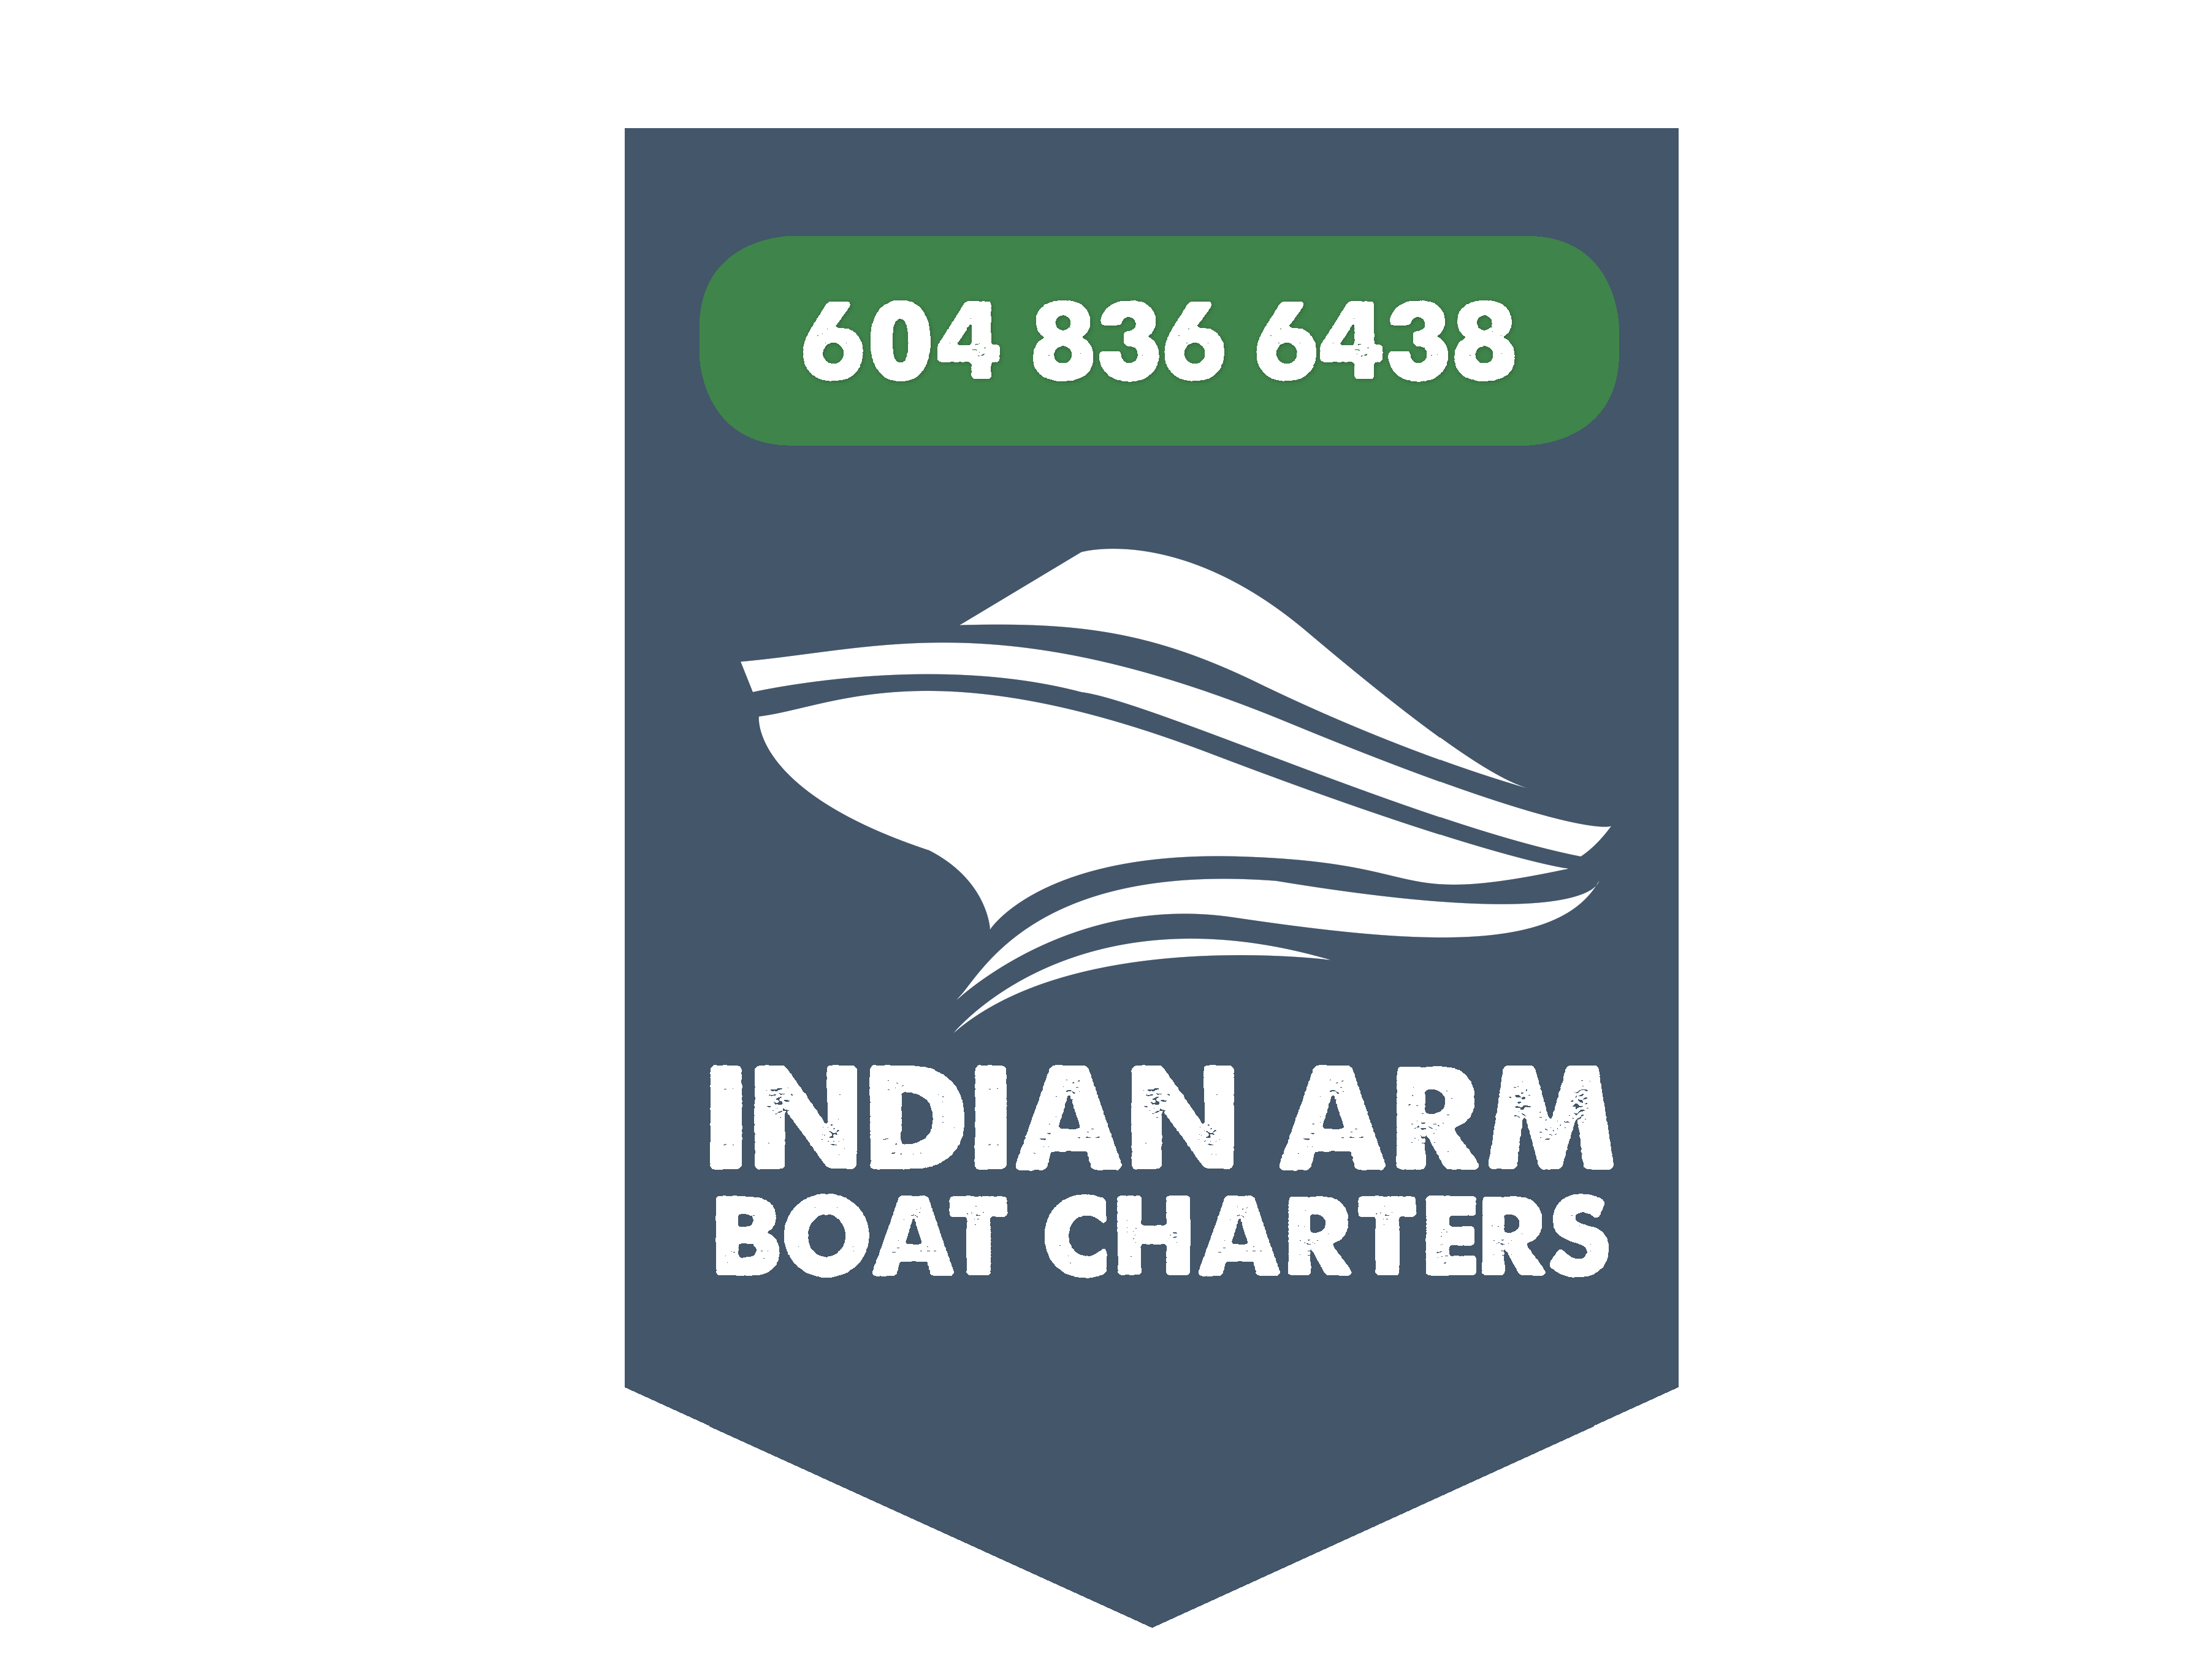 Indian Arm Boat Charters